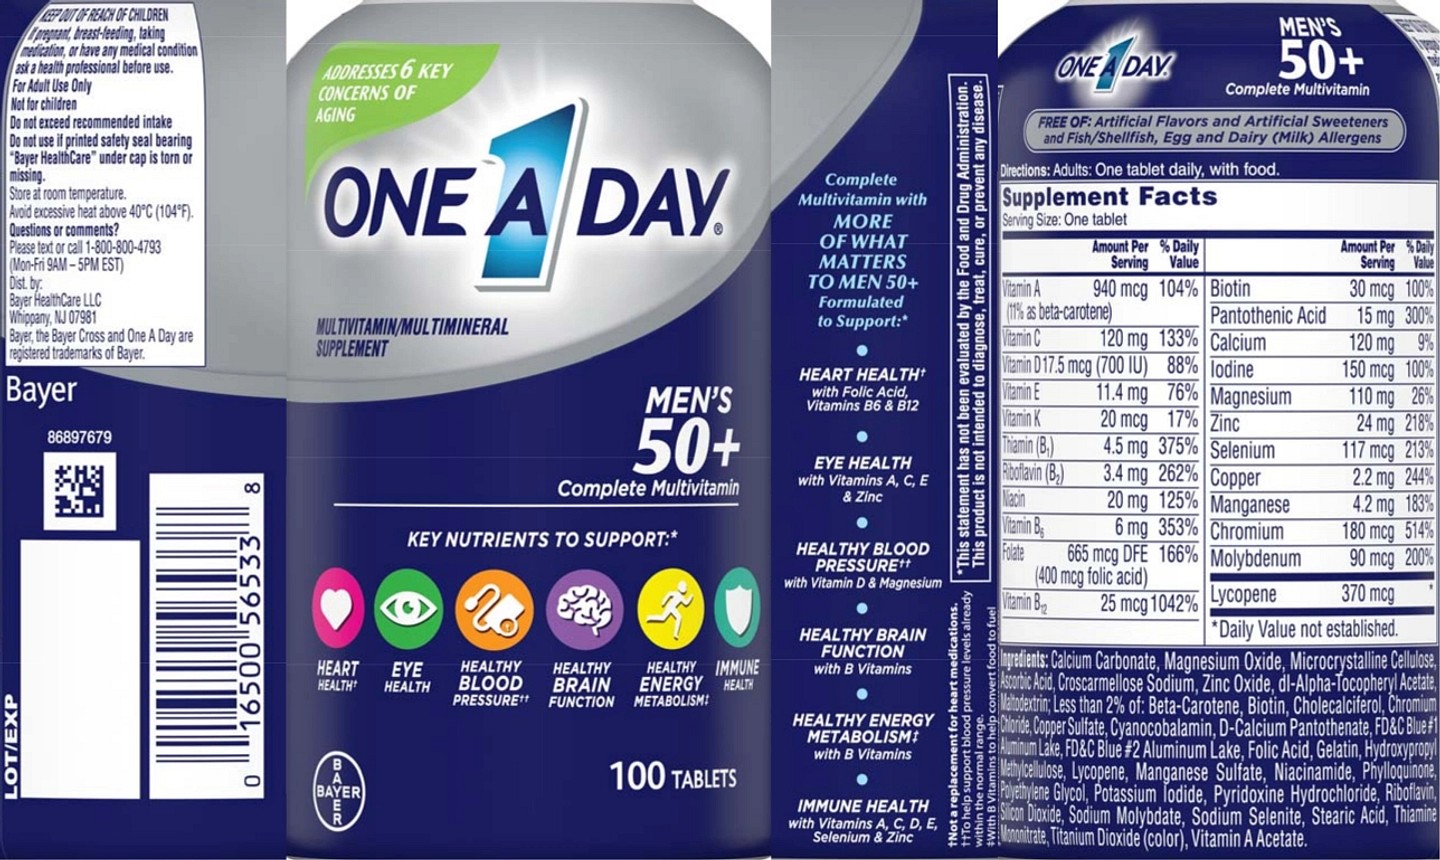 One-A-Day, Men's 50+ label